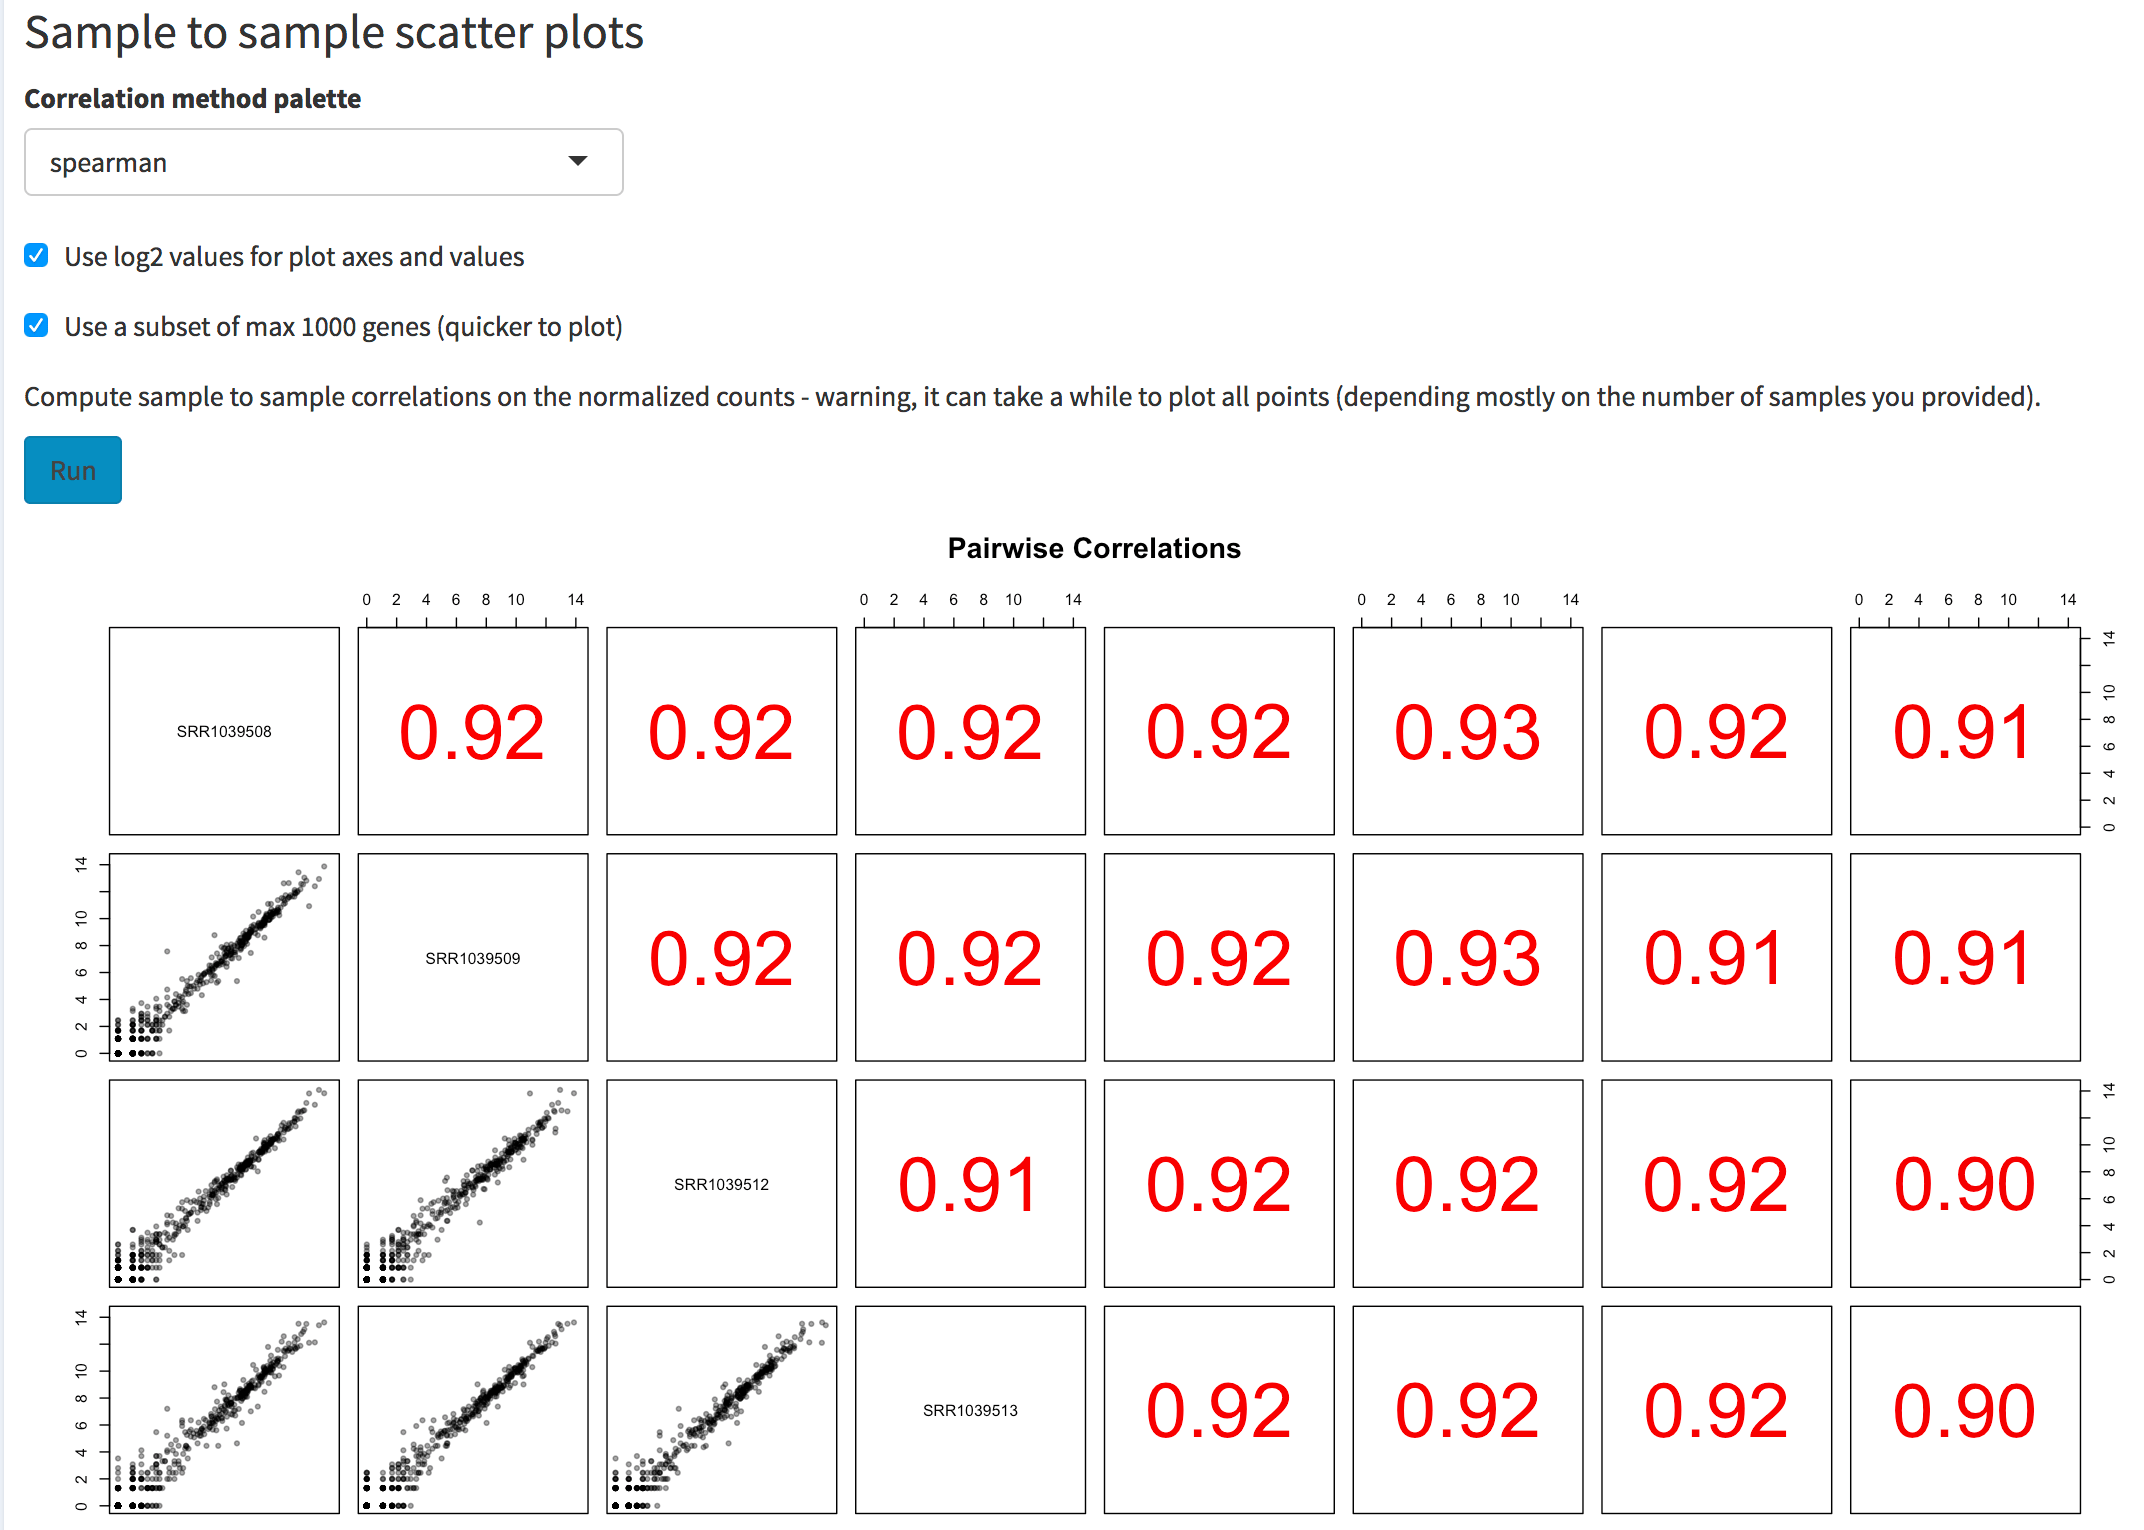 Screenshot of the sample to sample scatter plot matrix. The user can select the correlation method to use, the option to plot values on log2 scales, and the possibility to use a subset of genes (to obtain a quicker overview if many samples are provided).